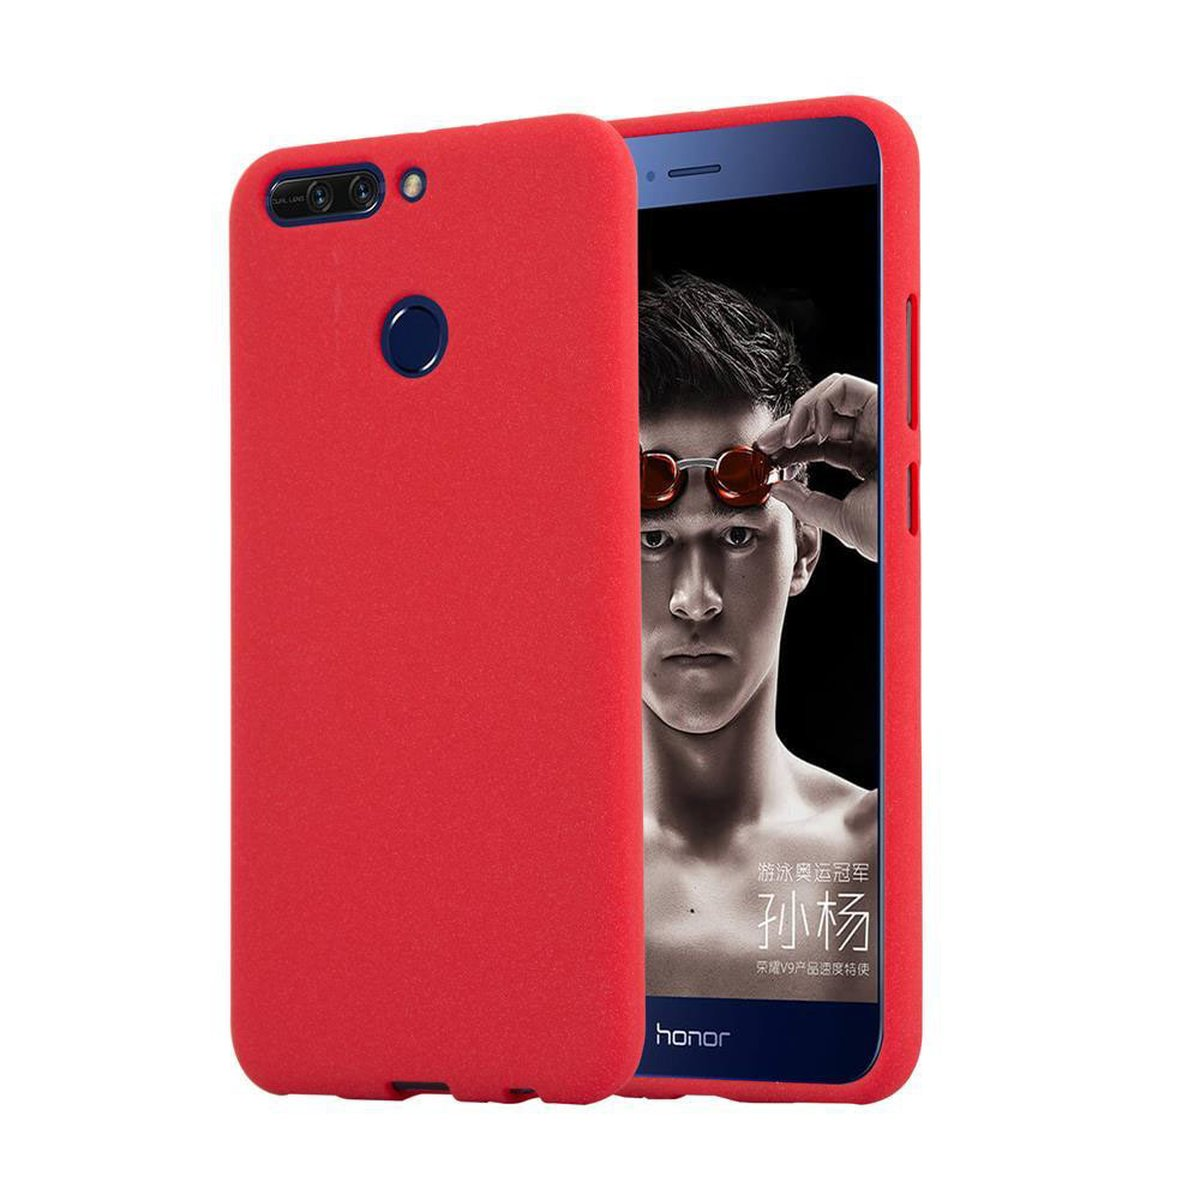 8 FROST Backcover, ROT Schutzhülle, PRO, Honor, Frosted TPU CADORABO